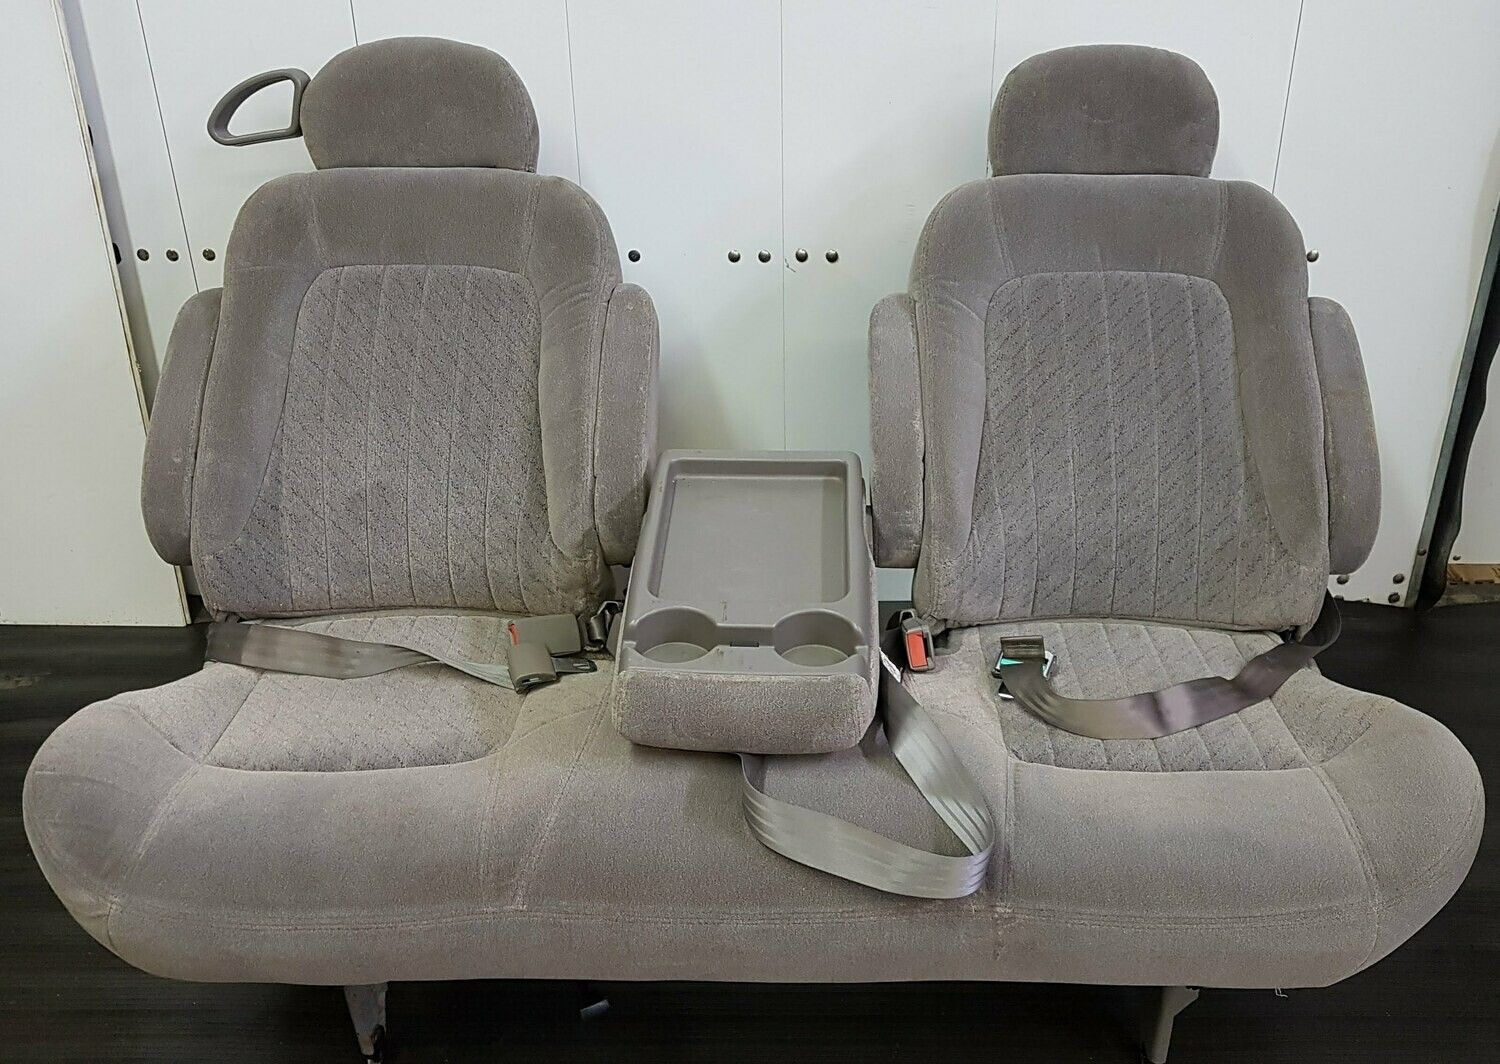 Bench Seat for Vans and RVs - Removable